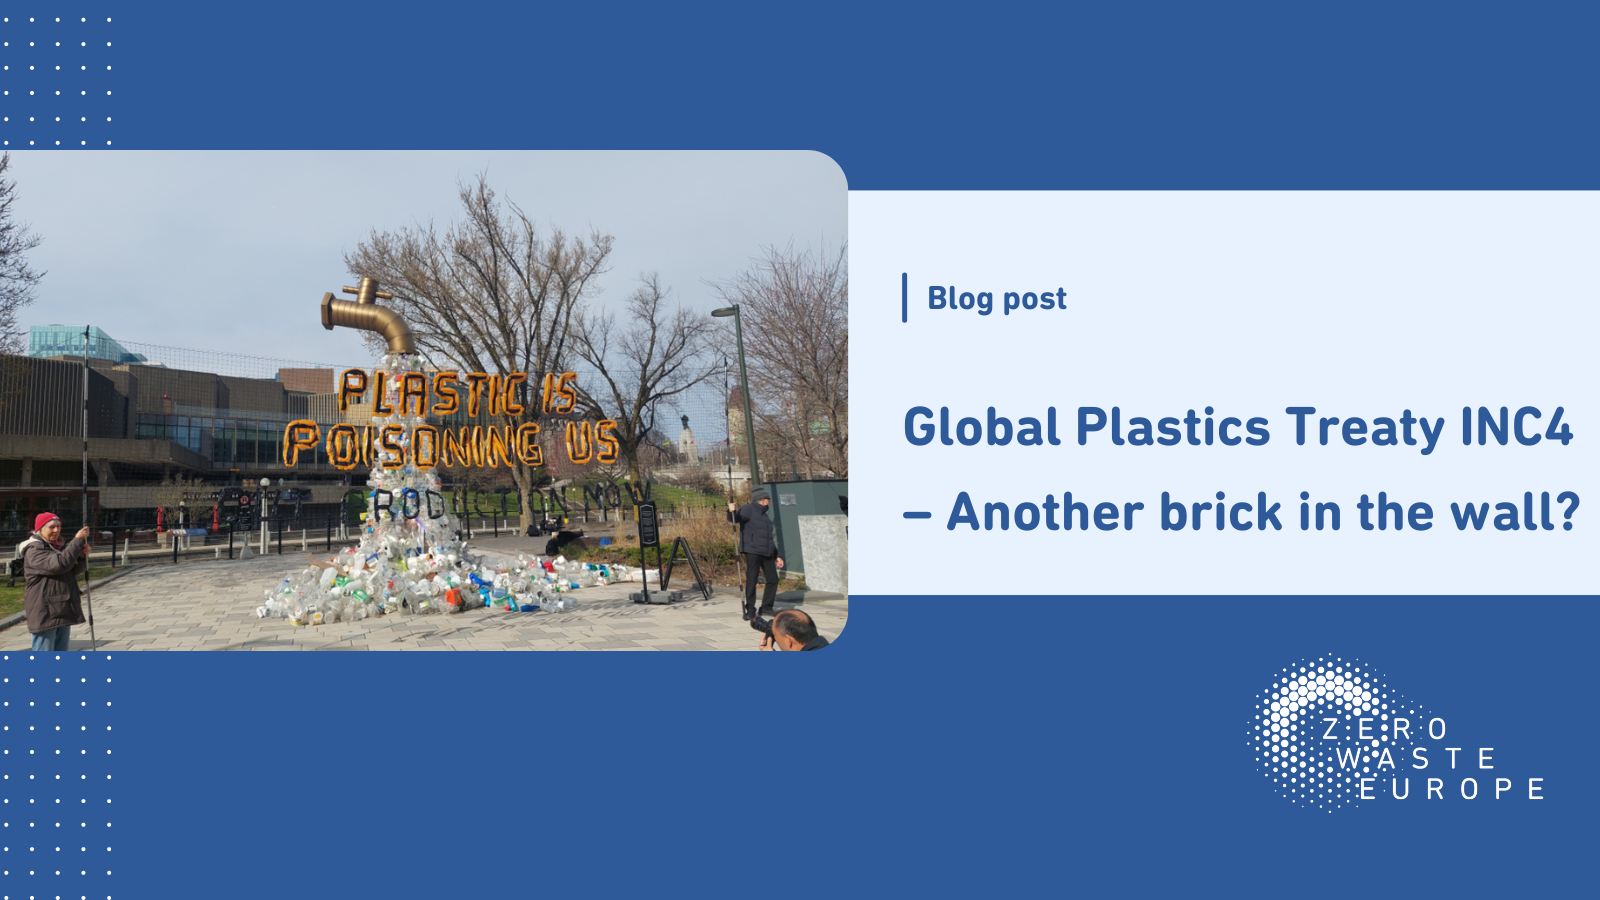 Global Plastics Treaty INC4 – another brick in the wall?